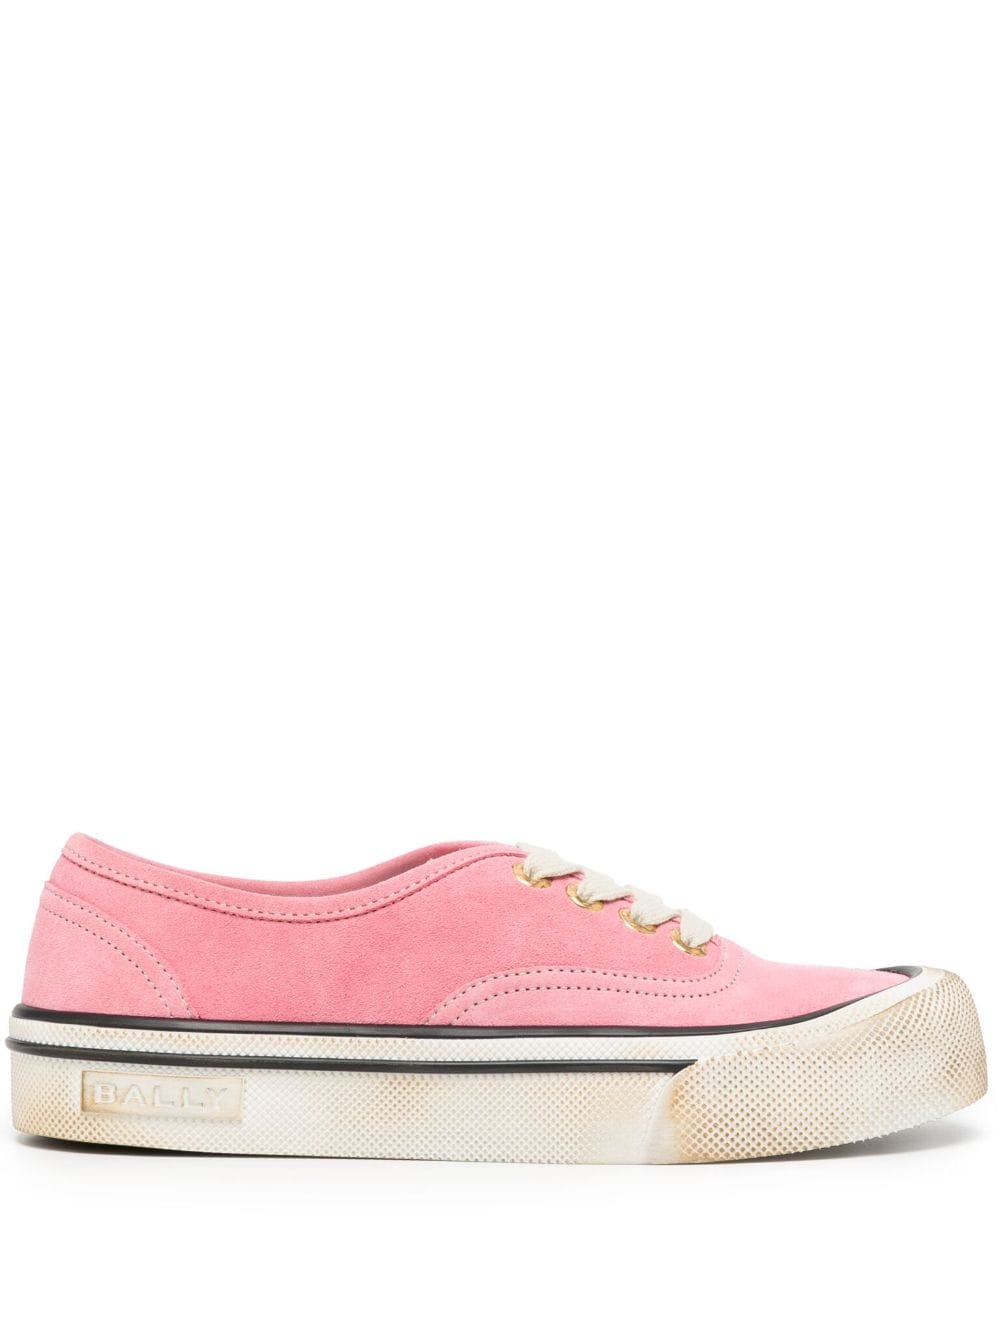 Bally Santa Ana Trainer In Suede In Pink